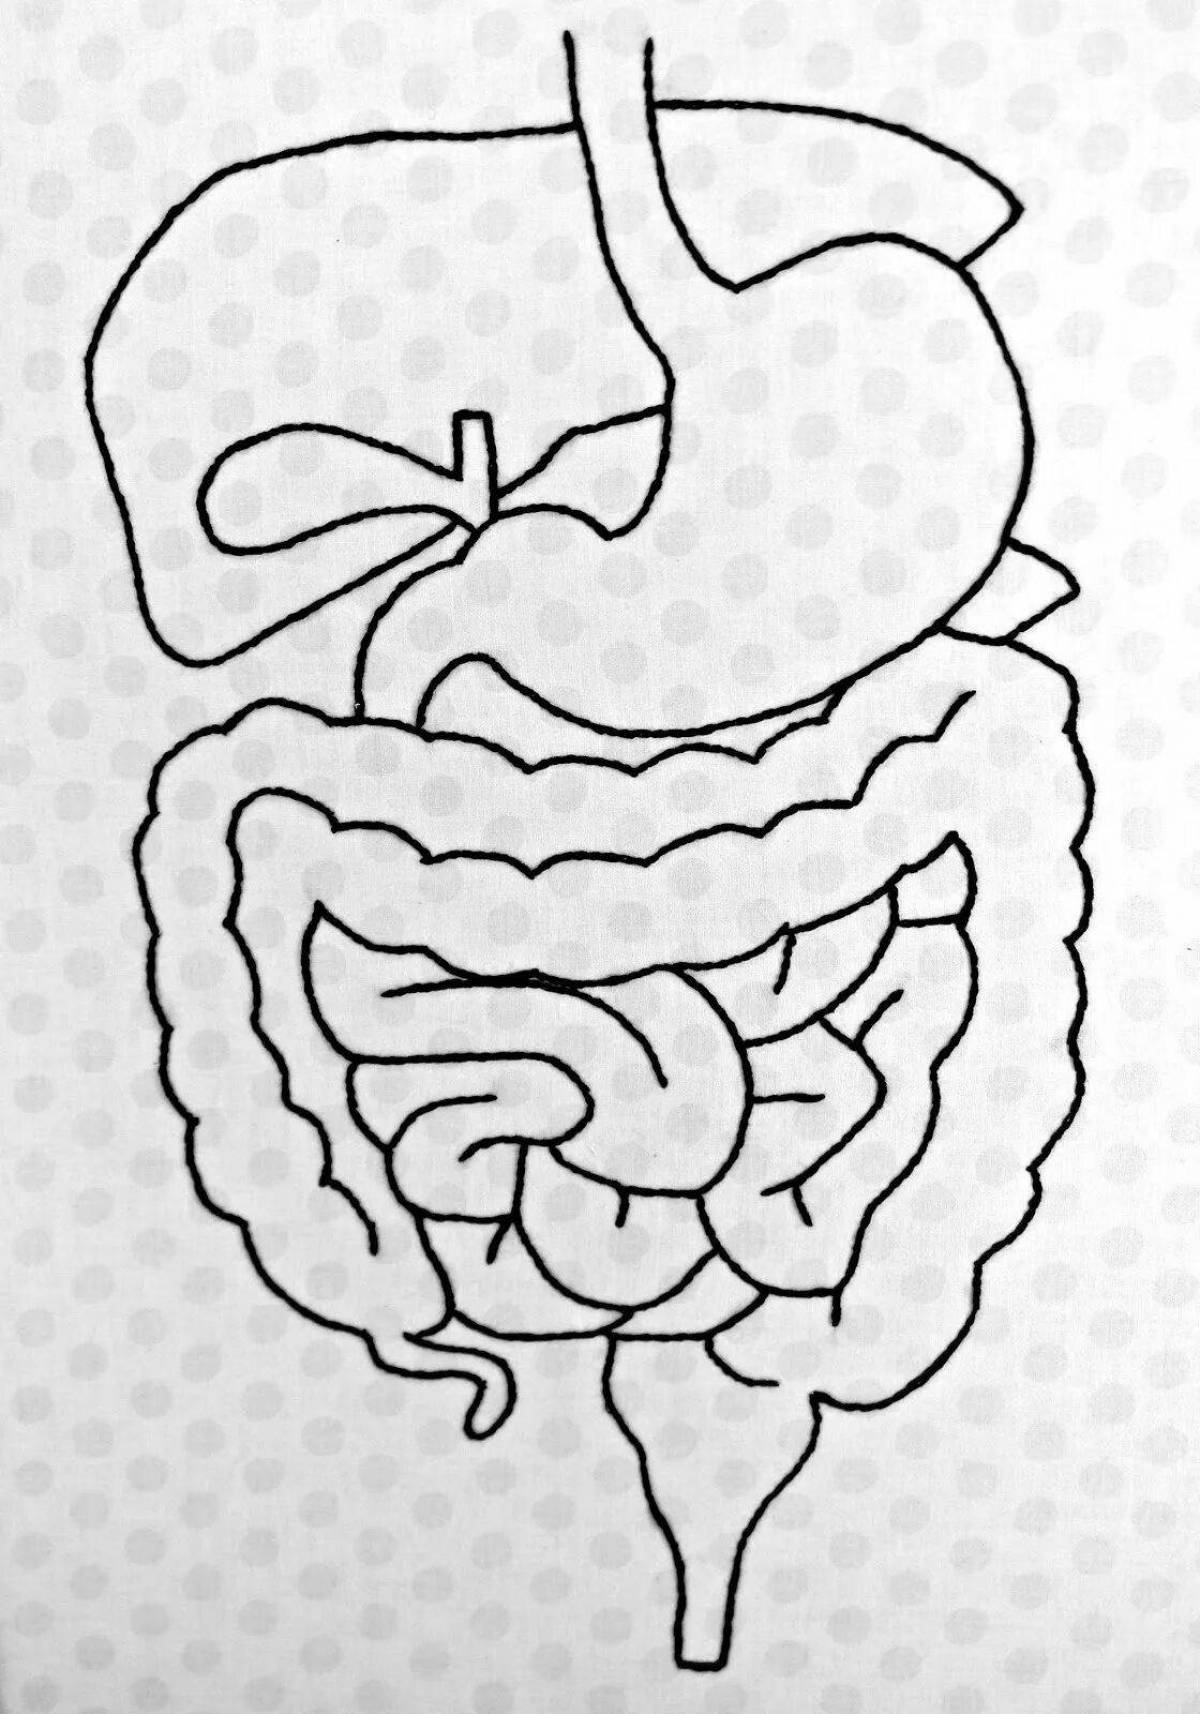 Colorful digestive system coloring page